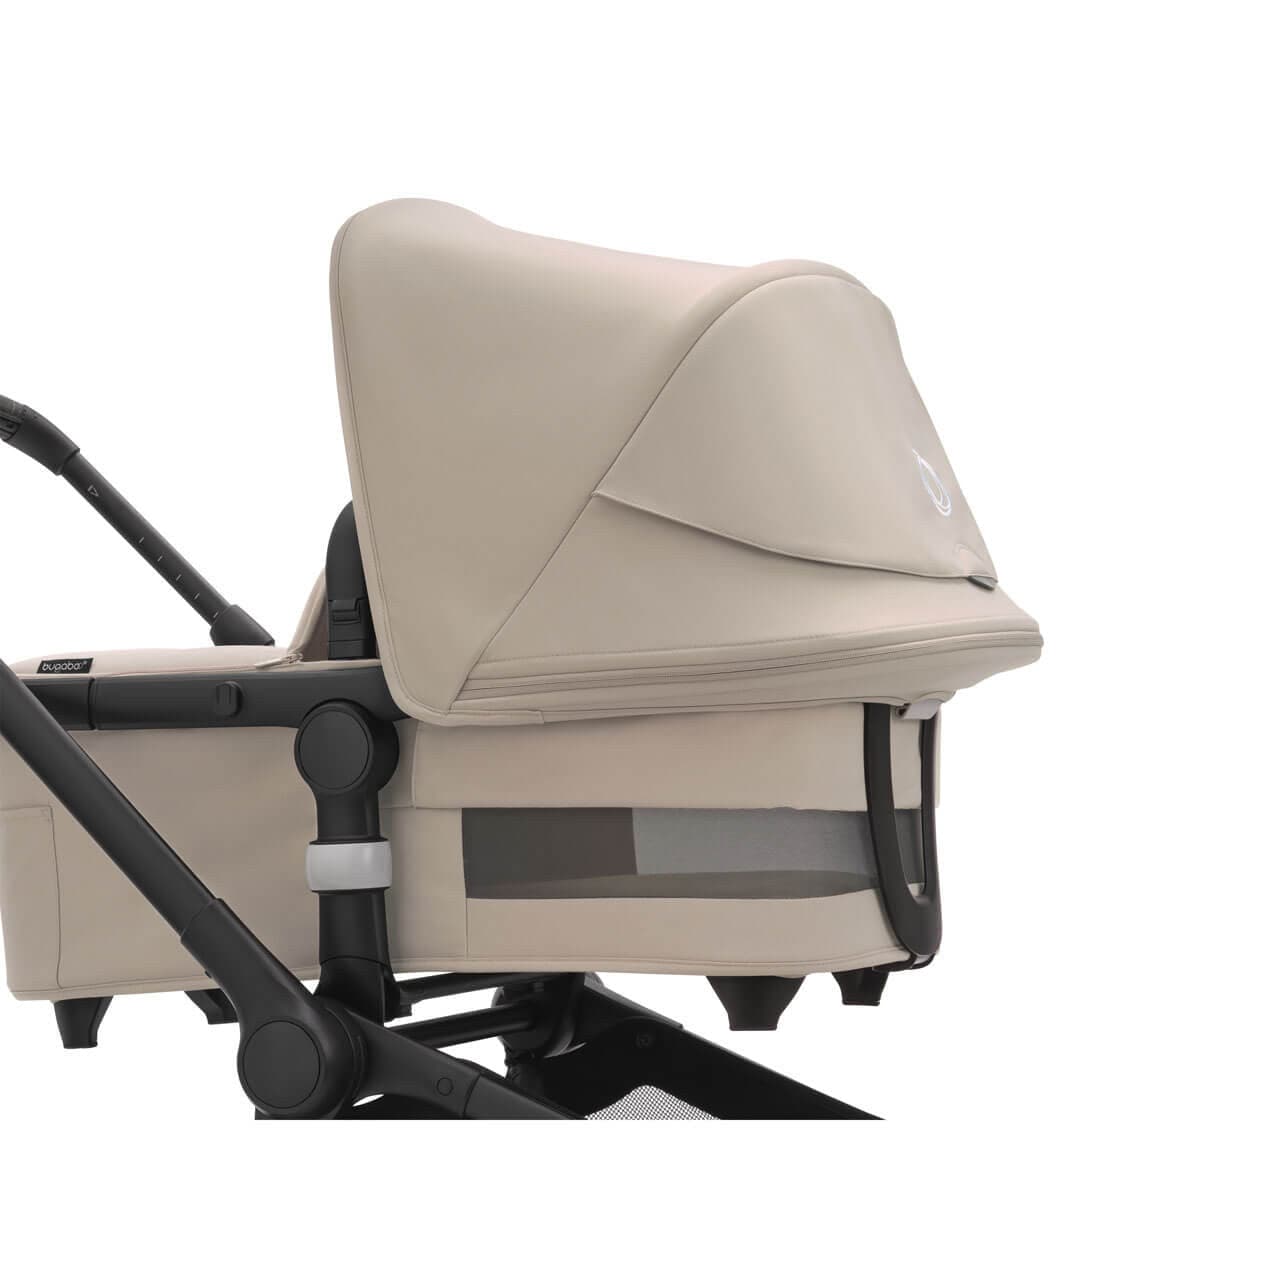 Bugaboo Fox 5 Essential Travel System Bundle - Black/Desert Taupe - For Your Little One